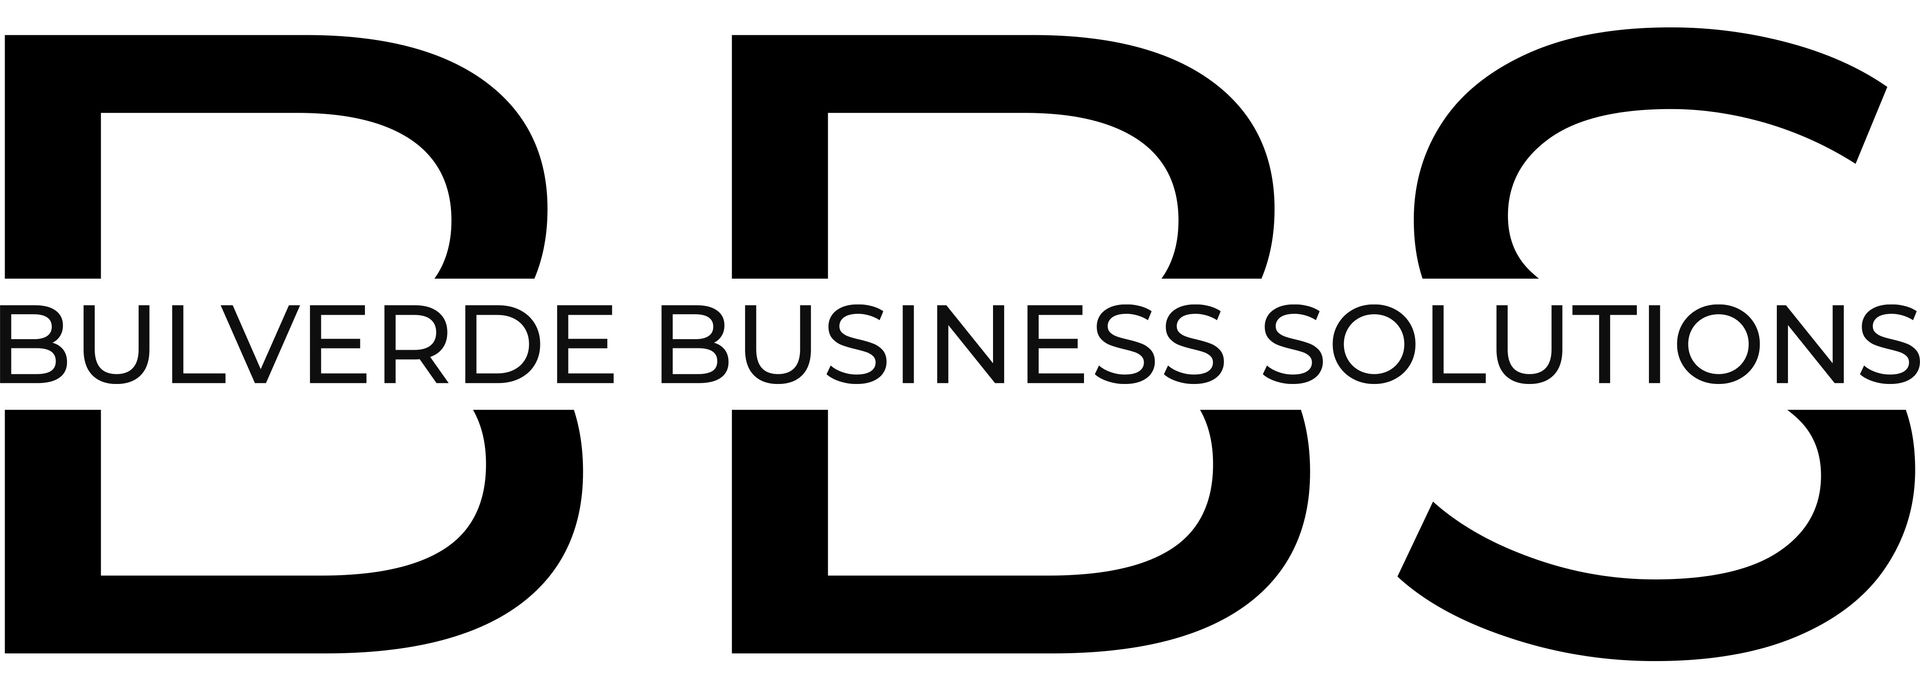 A black and white logo for bulverde business solutions